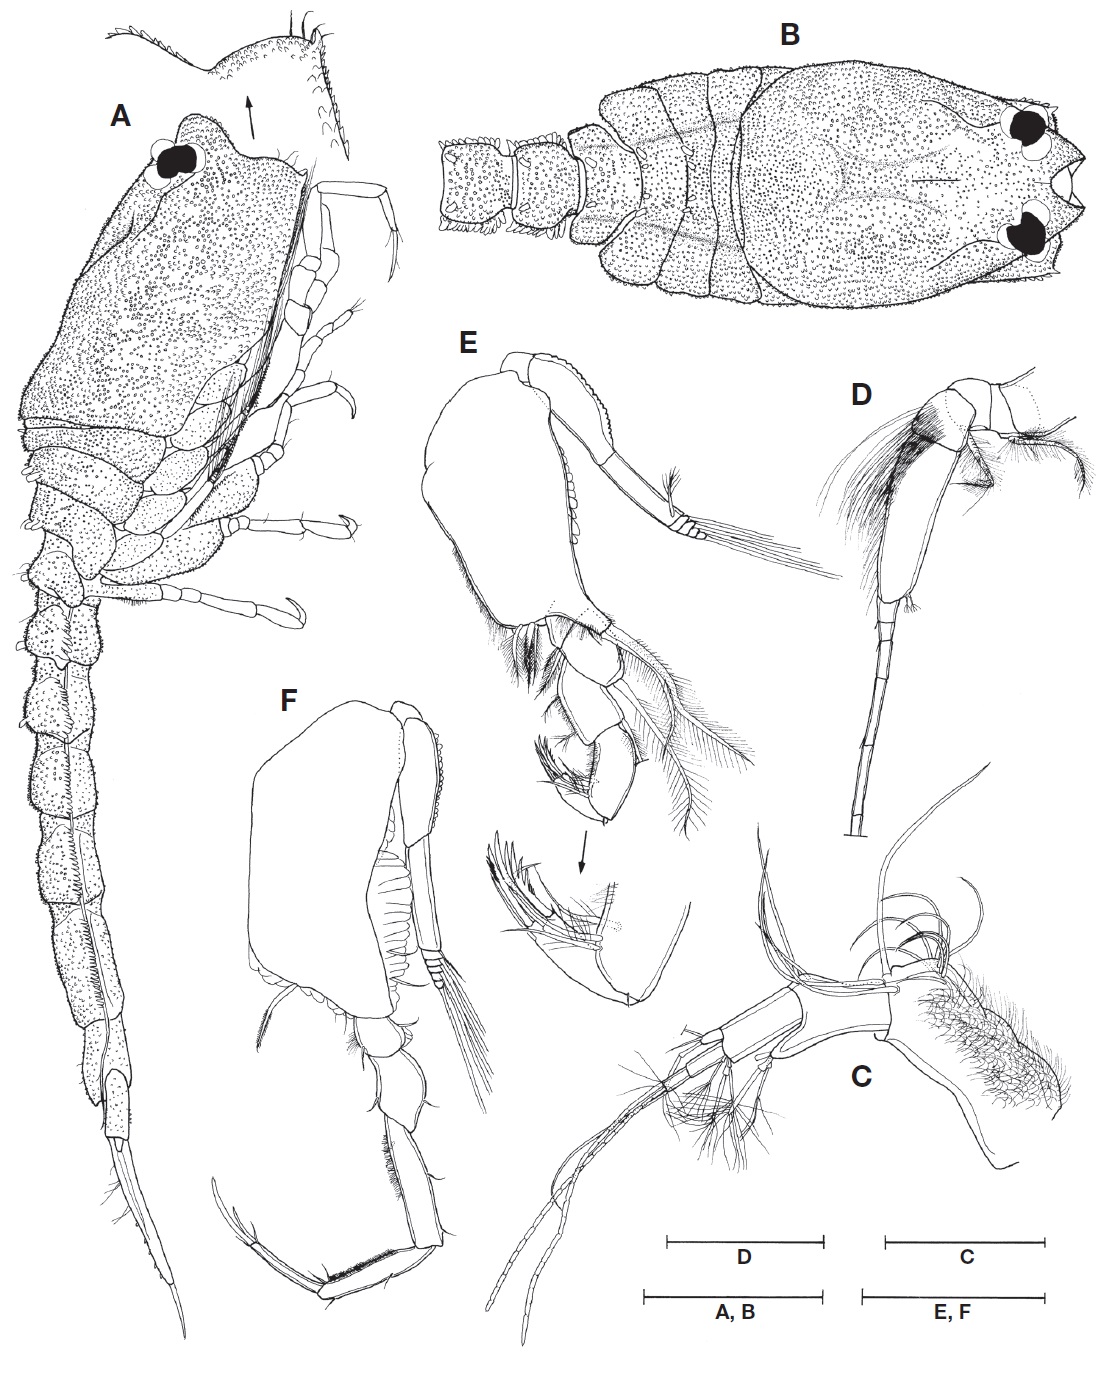 Nannastacus nyctagineus Gam？, adult male: A, Habitus, lateral view; B, Cephalothorax and pleonites, dorsal view; C, Antenna 1; D, Antenna 2; E, Maxilliped 3; F, pereopod 1. Scale bars: A-C, E, F=0.3 mm, D=0.2 mm.